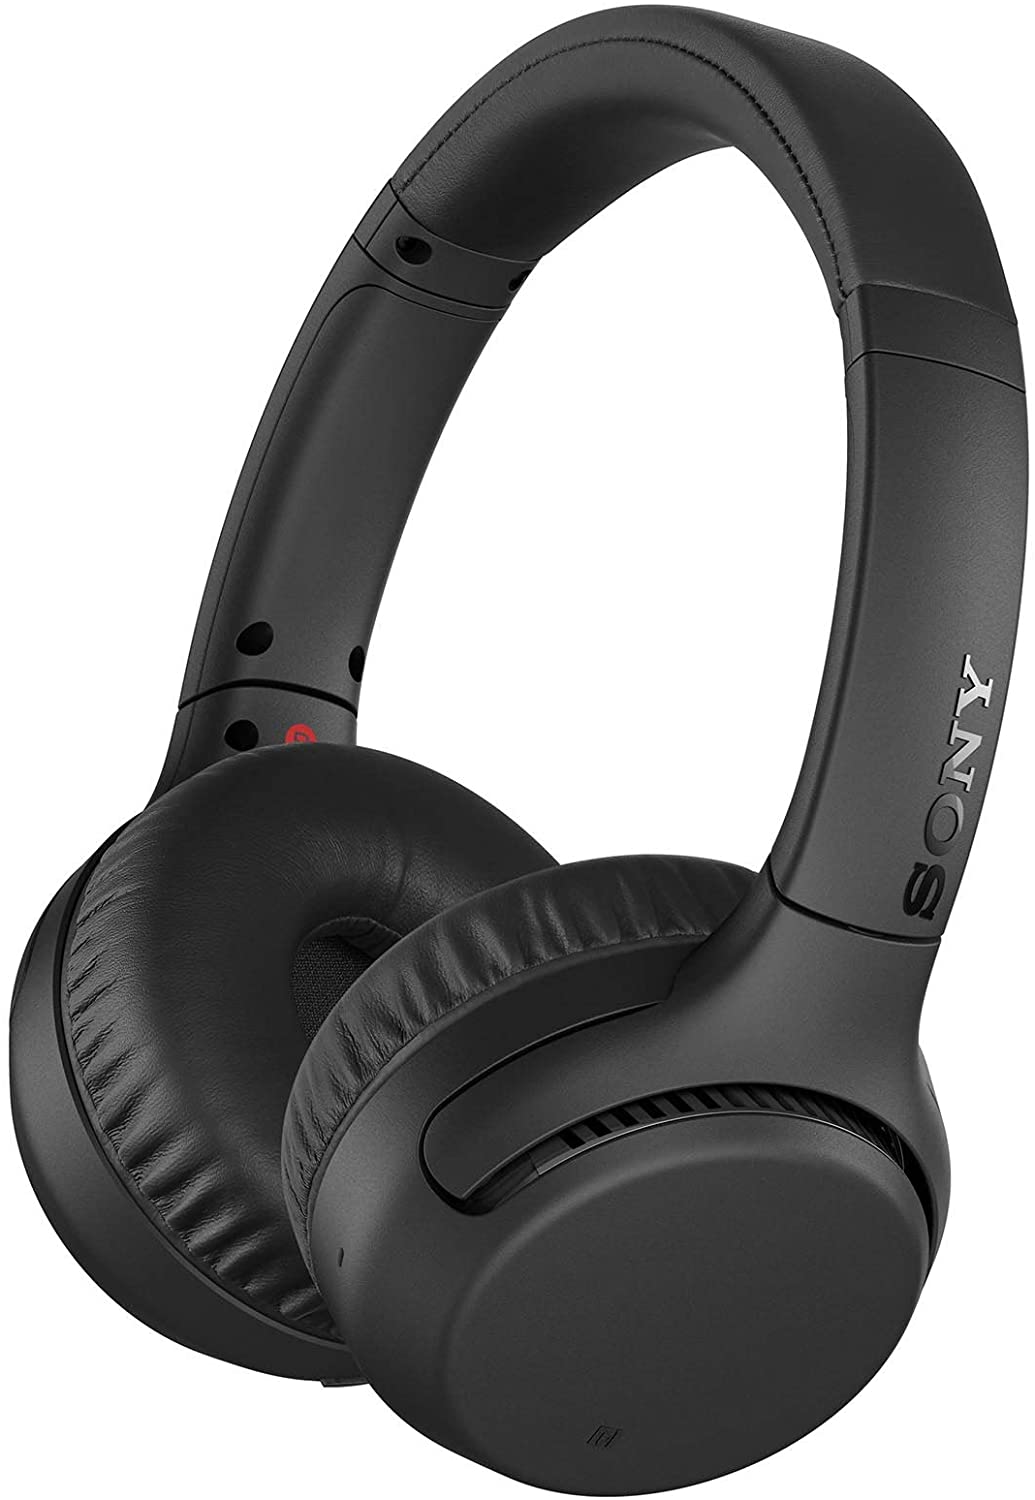 ''Sony WHXB700 Wireless Extra Bass Bluetooth Headset/HEADPHONES with mic for Phone Call and Alexa Voi